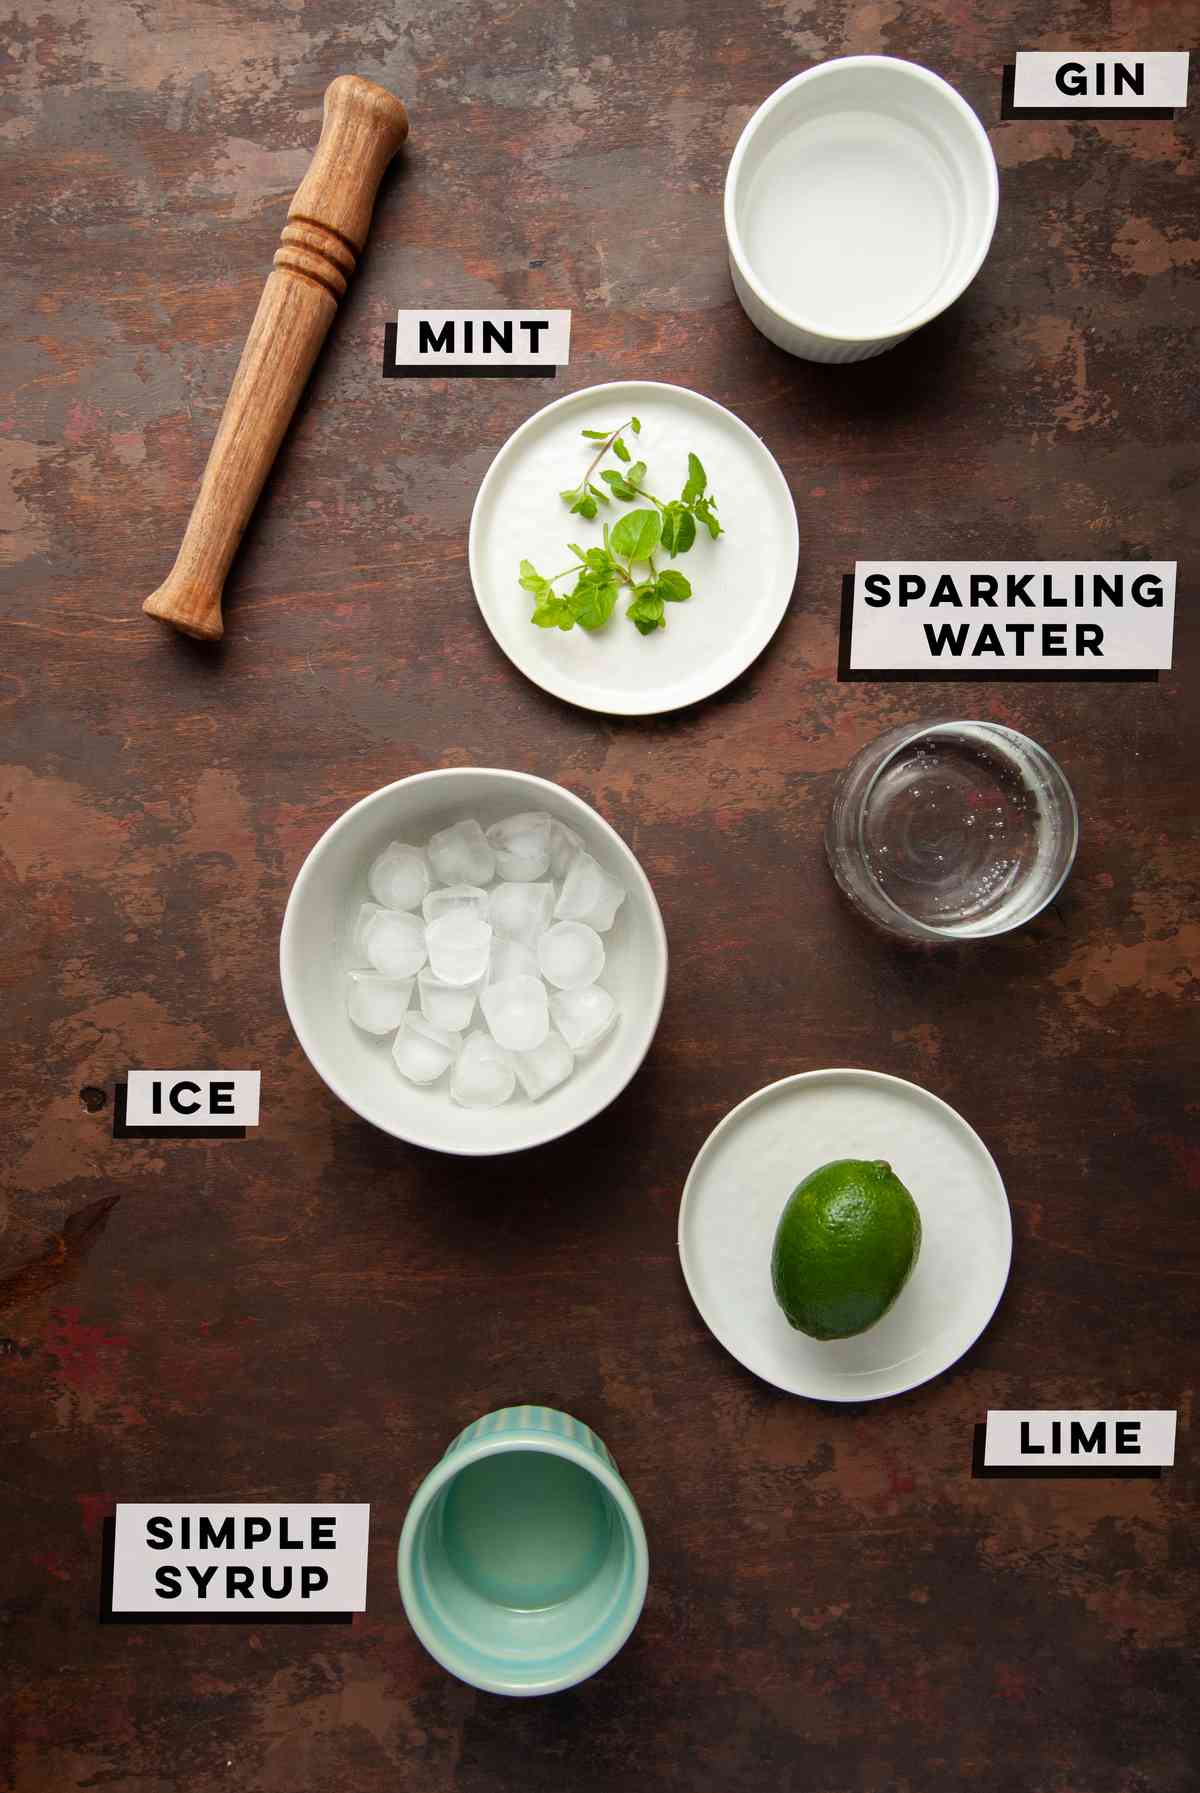 Gin, Mint, Sparkling Water, Ice, Lime, Simple Syrup